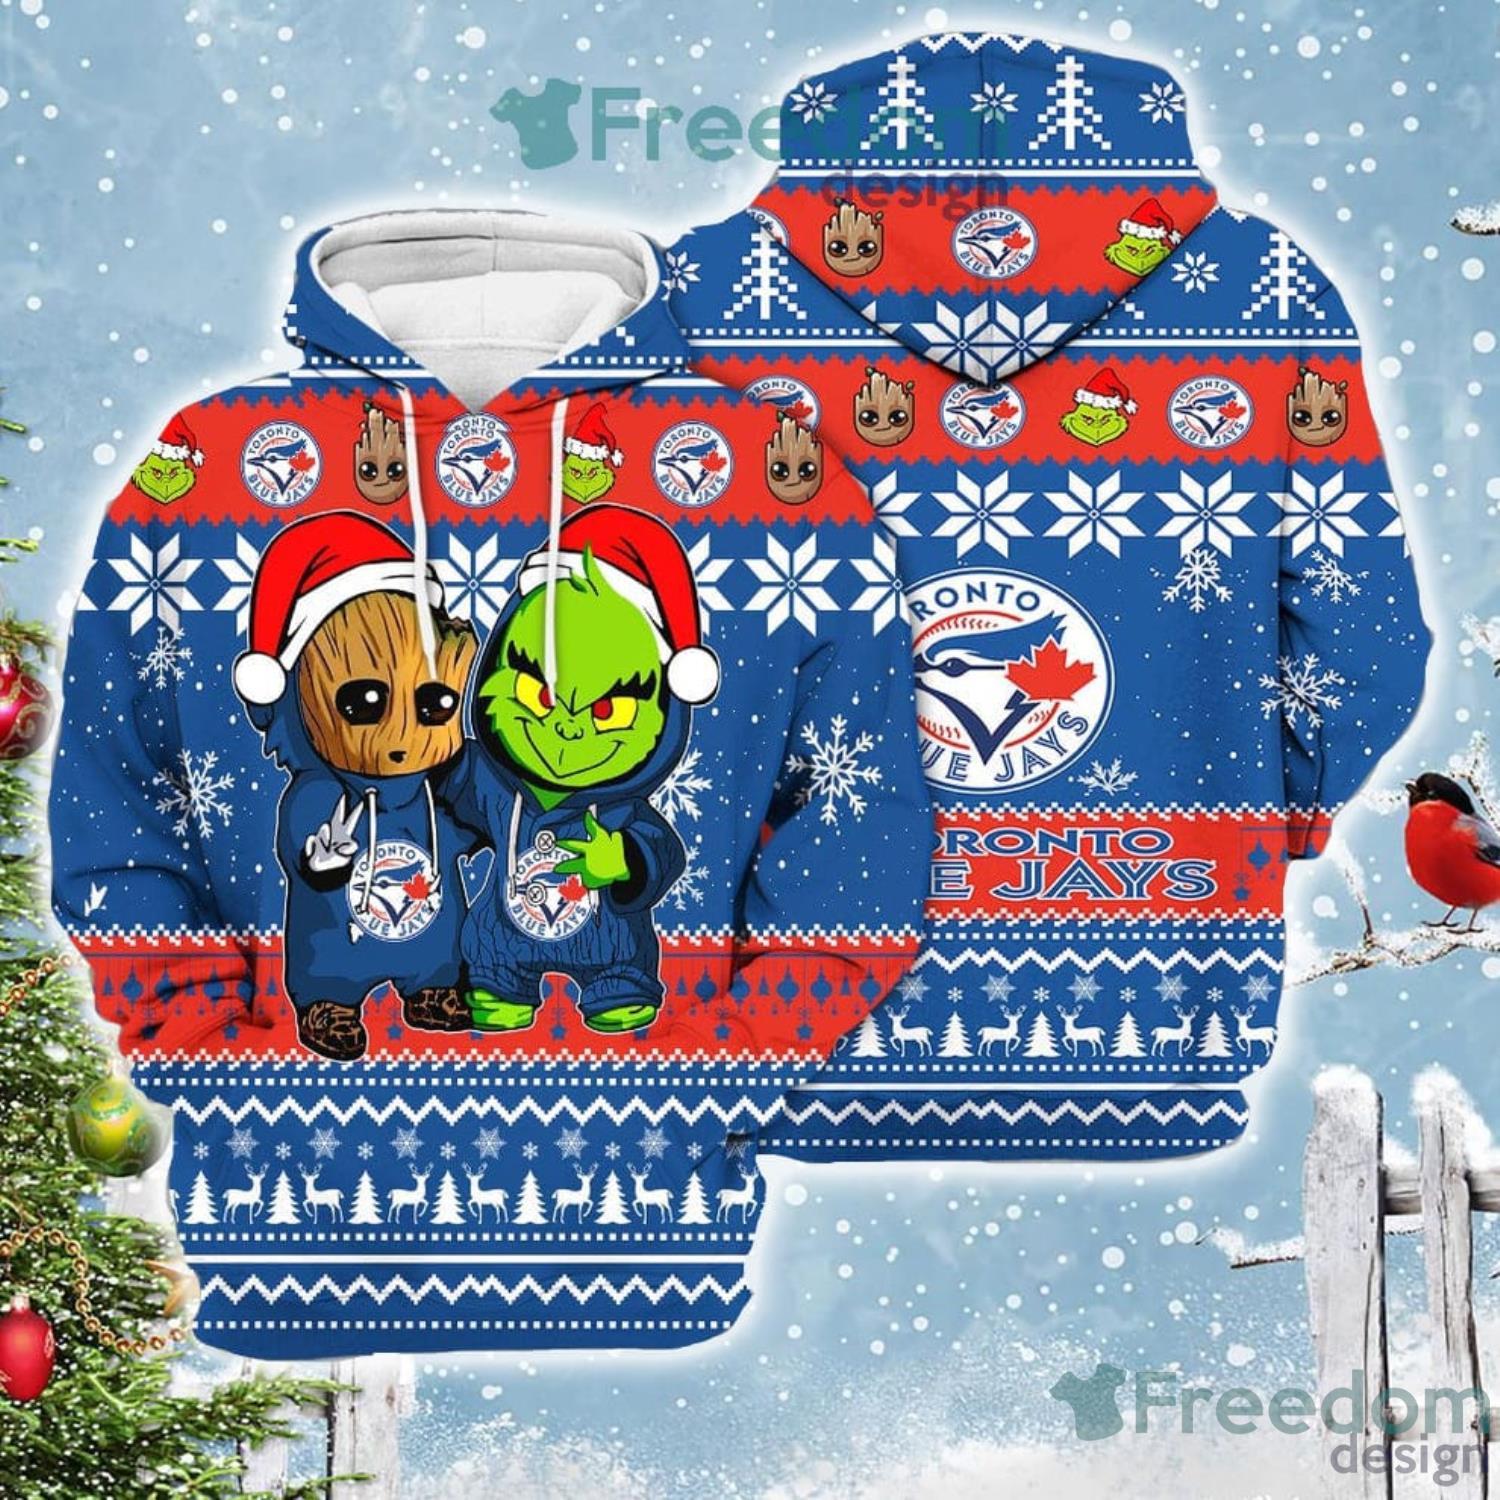 Toronto Blue Jays Baby Groot And Grinch Best Friends Football American Ugly  Christmas Sweater - Freedomdesign